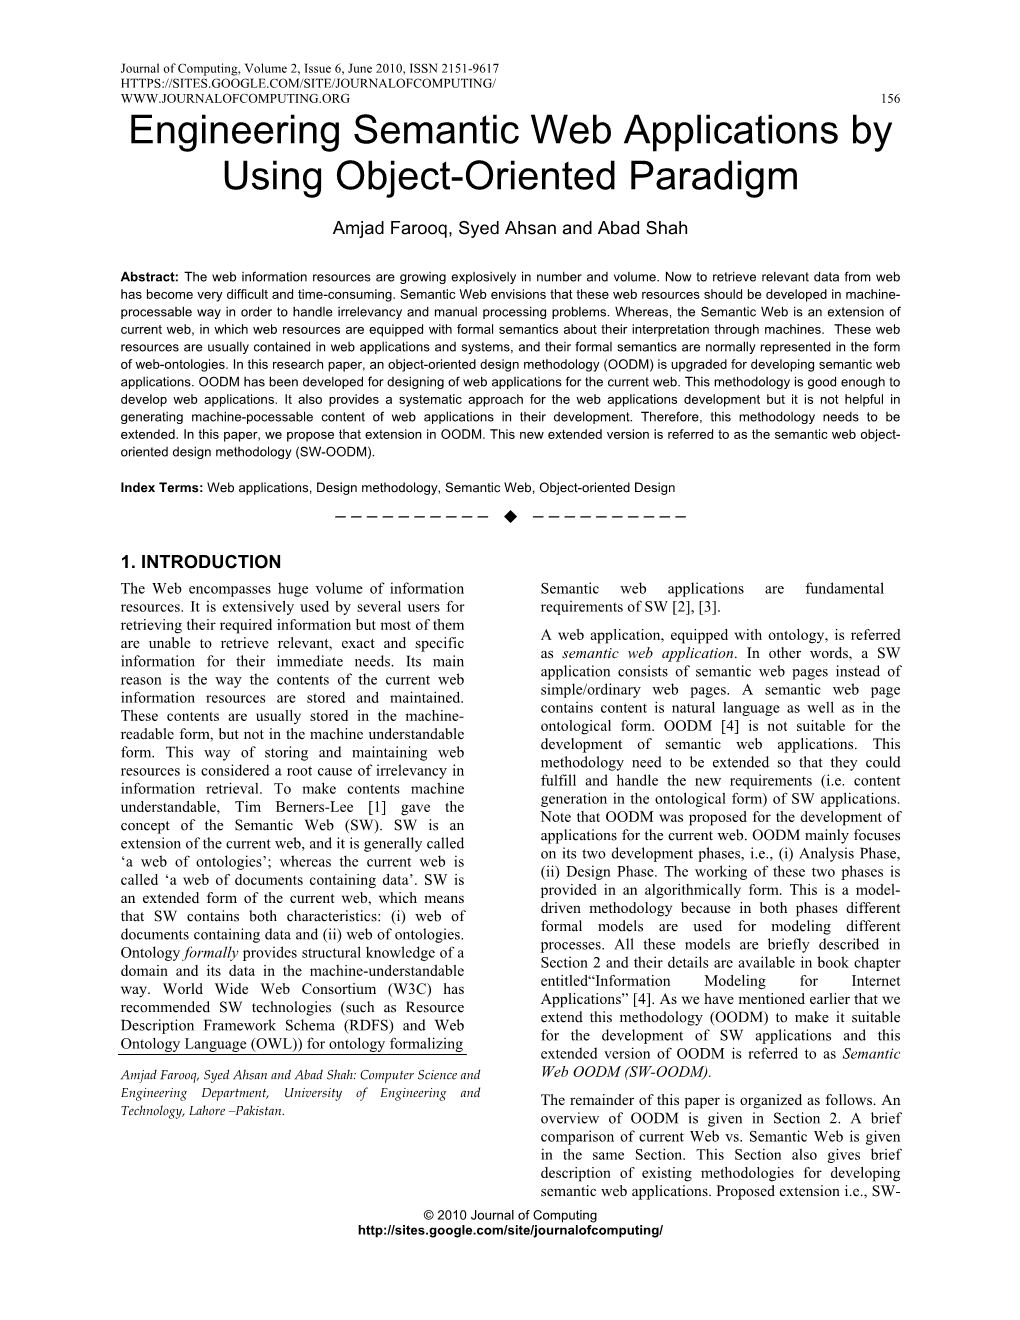 Engineering Semantic Web Applications by Using Object-Oriented Paradigm